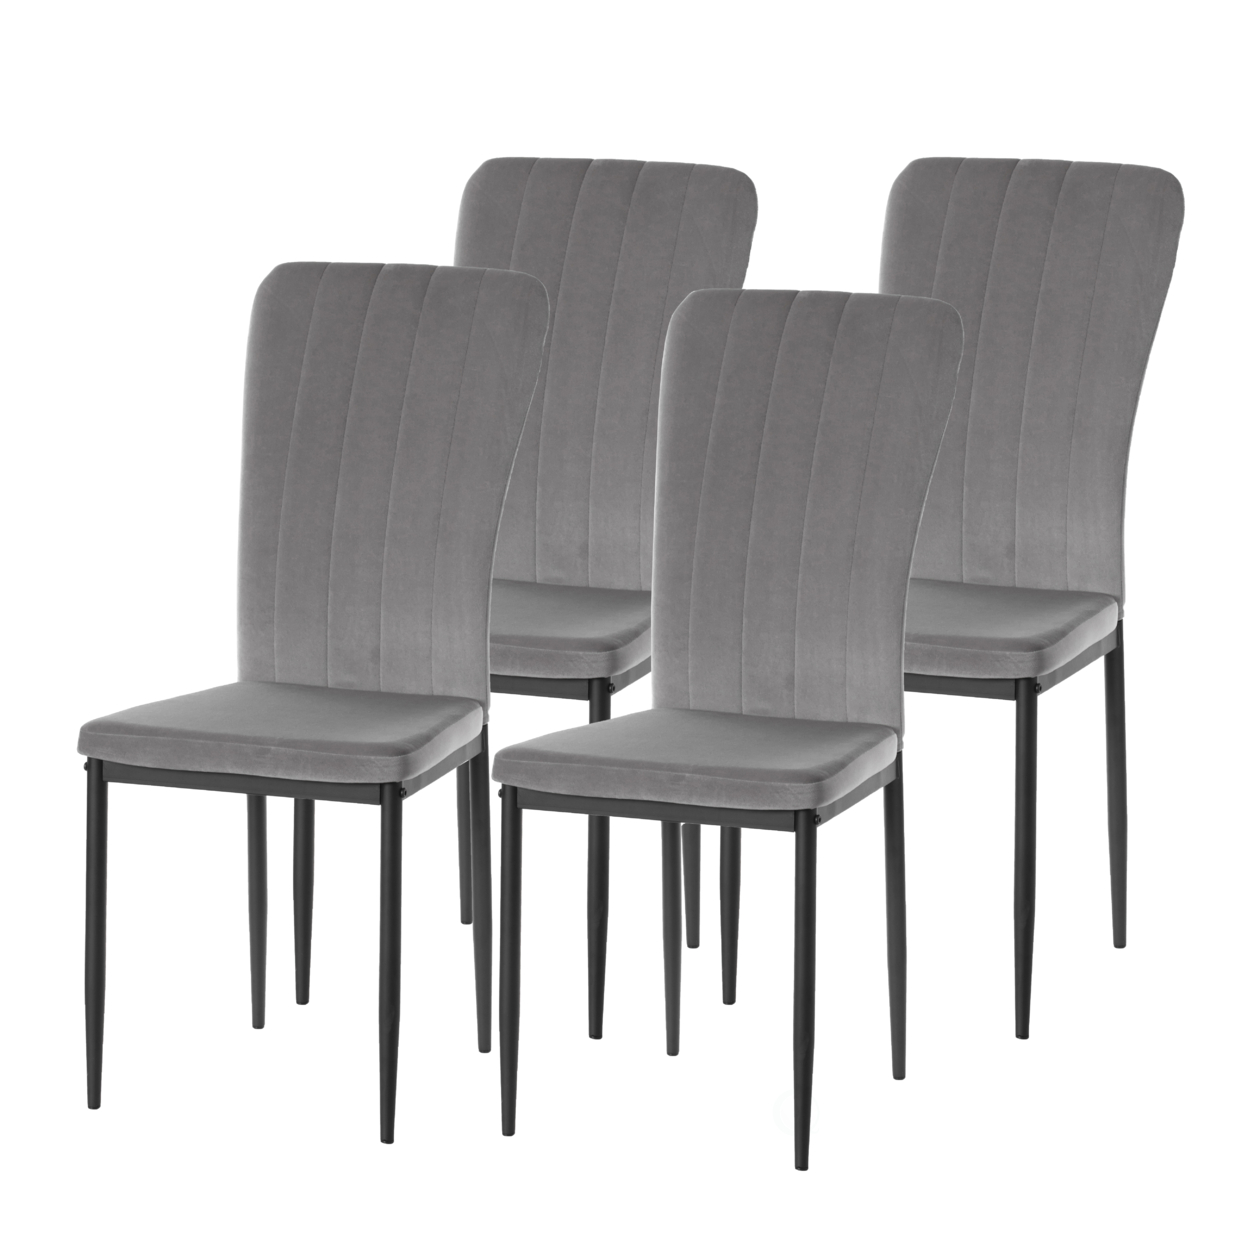 Modern And Contemporary Tufted Velvet Upholstered Accent Dining Chair - Set Of 4 Grey